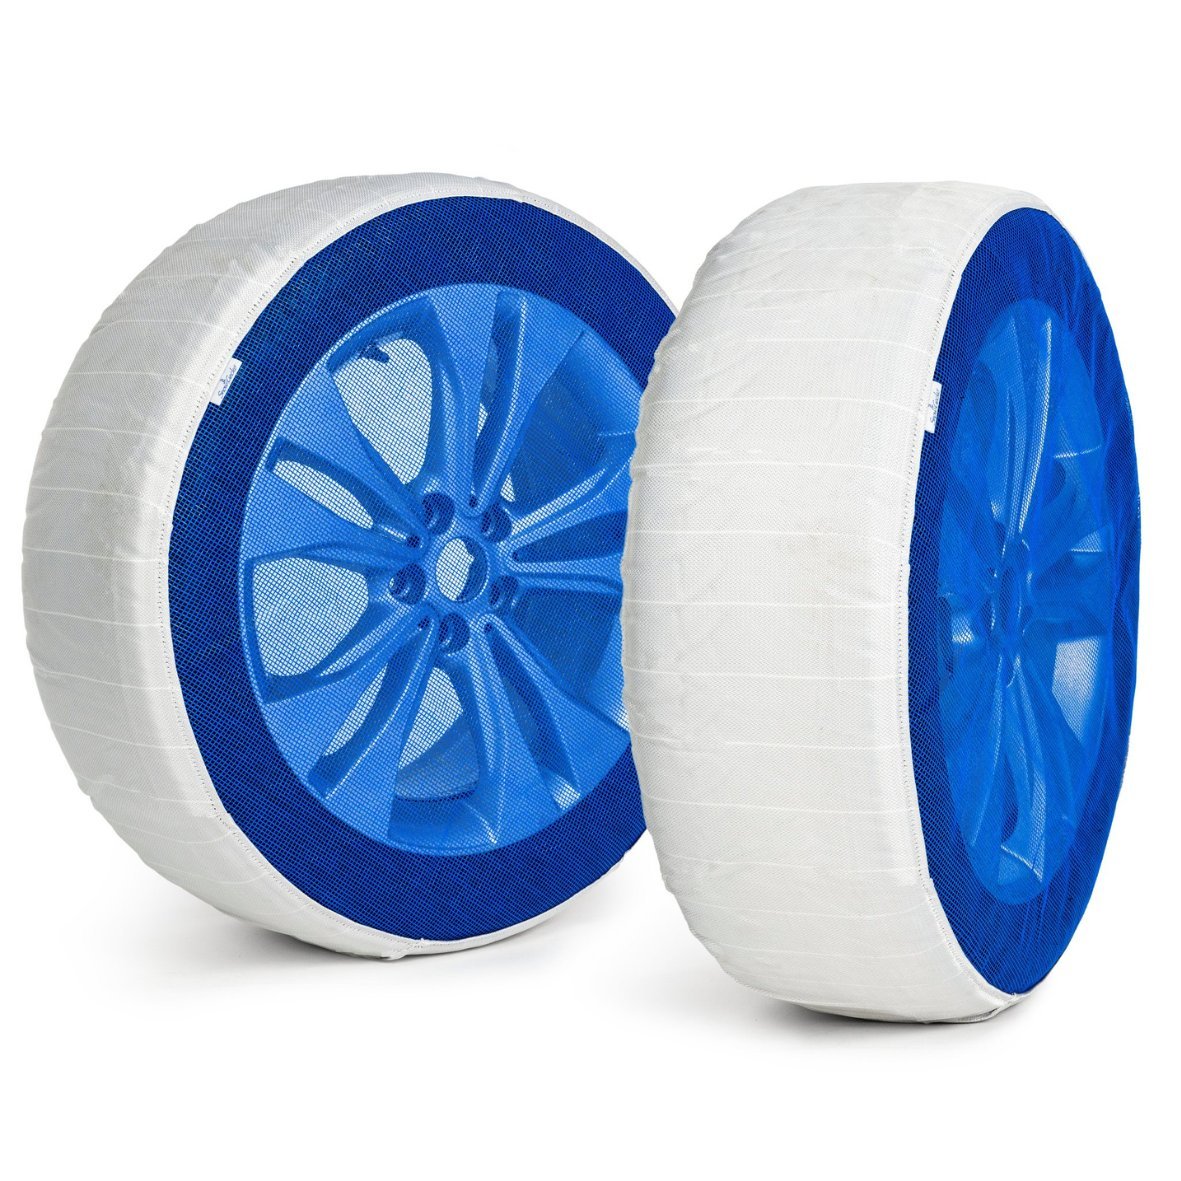 Pair of SnowGecko XL textile snow chains installed on two wheels in front of white background showing product frontside